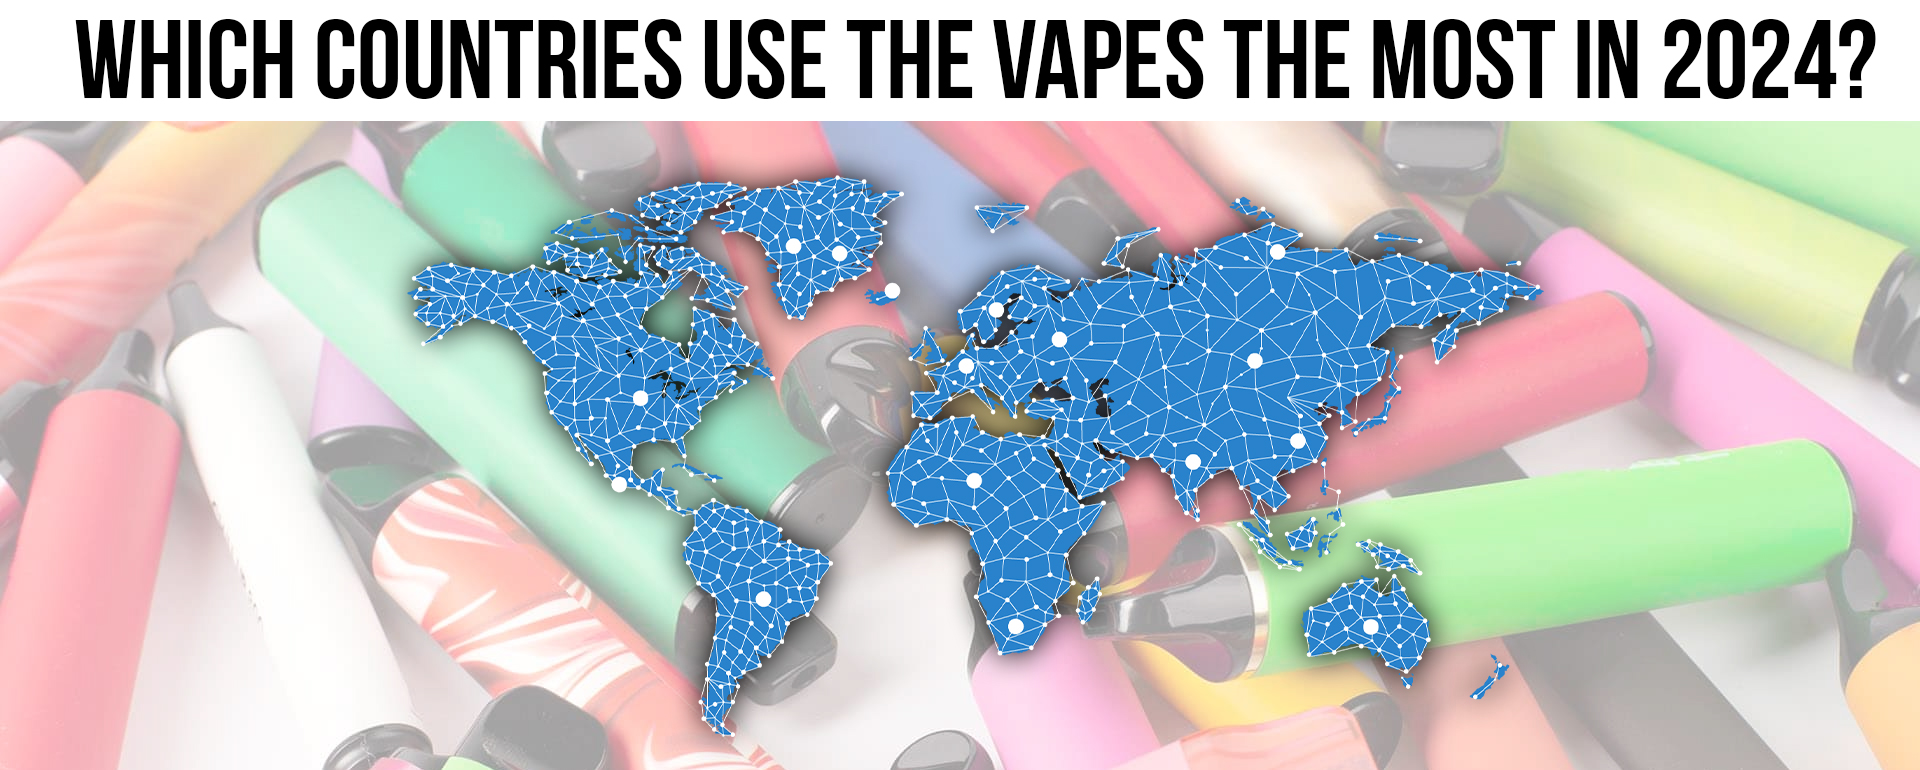 Which Countries Use Vapes the Most in 2024?